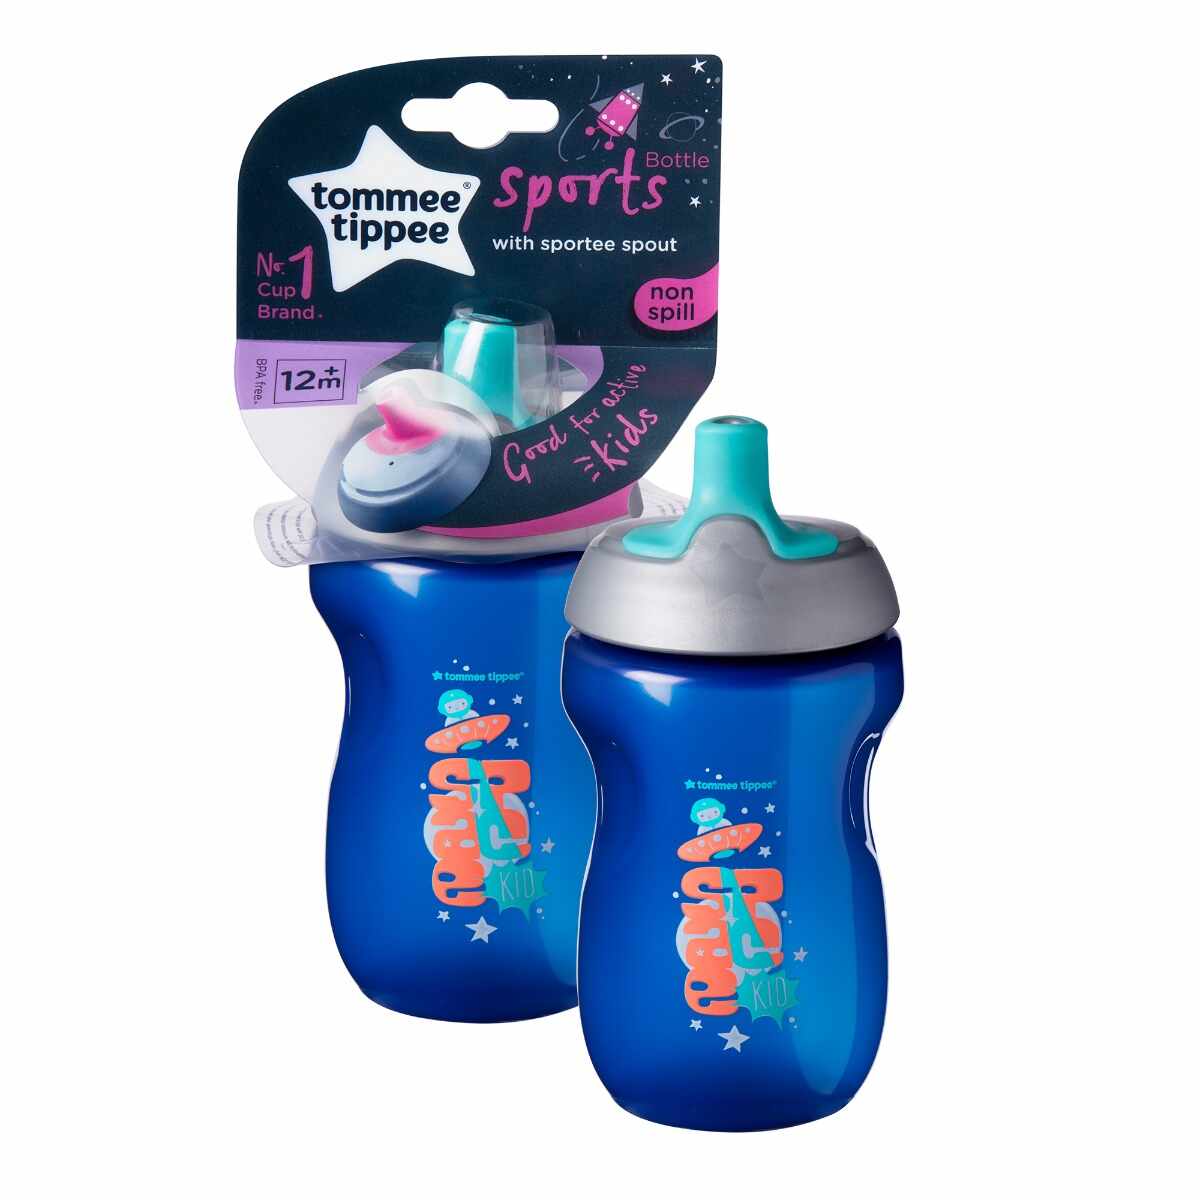 Cana albastra sports ONL 12 luni+, 300ml, Tommee Tippee